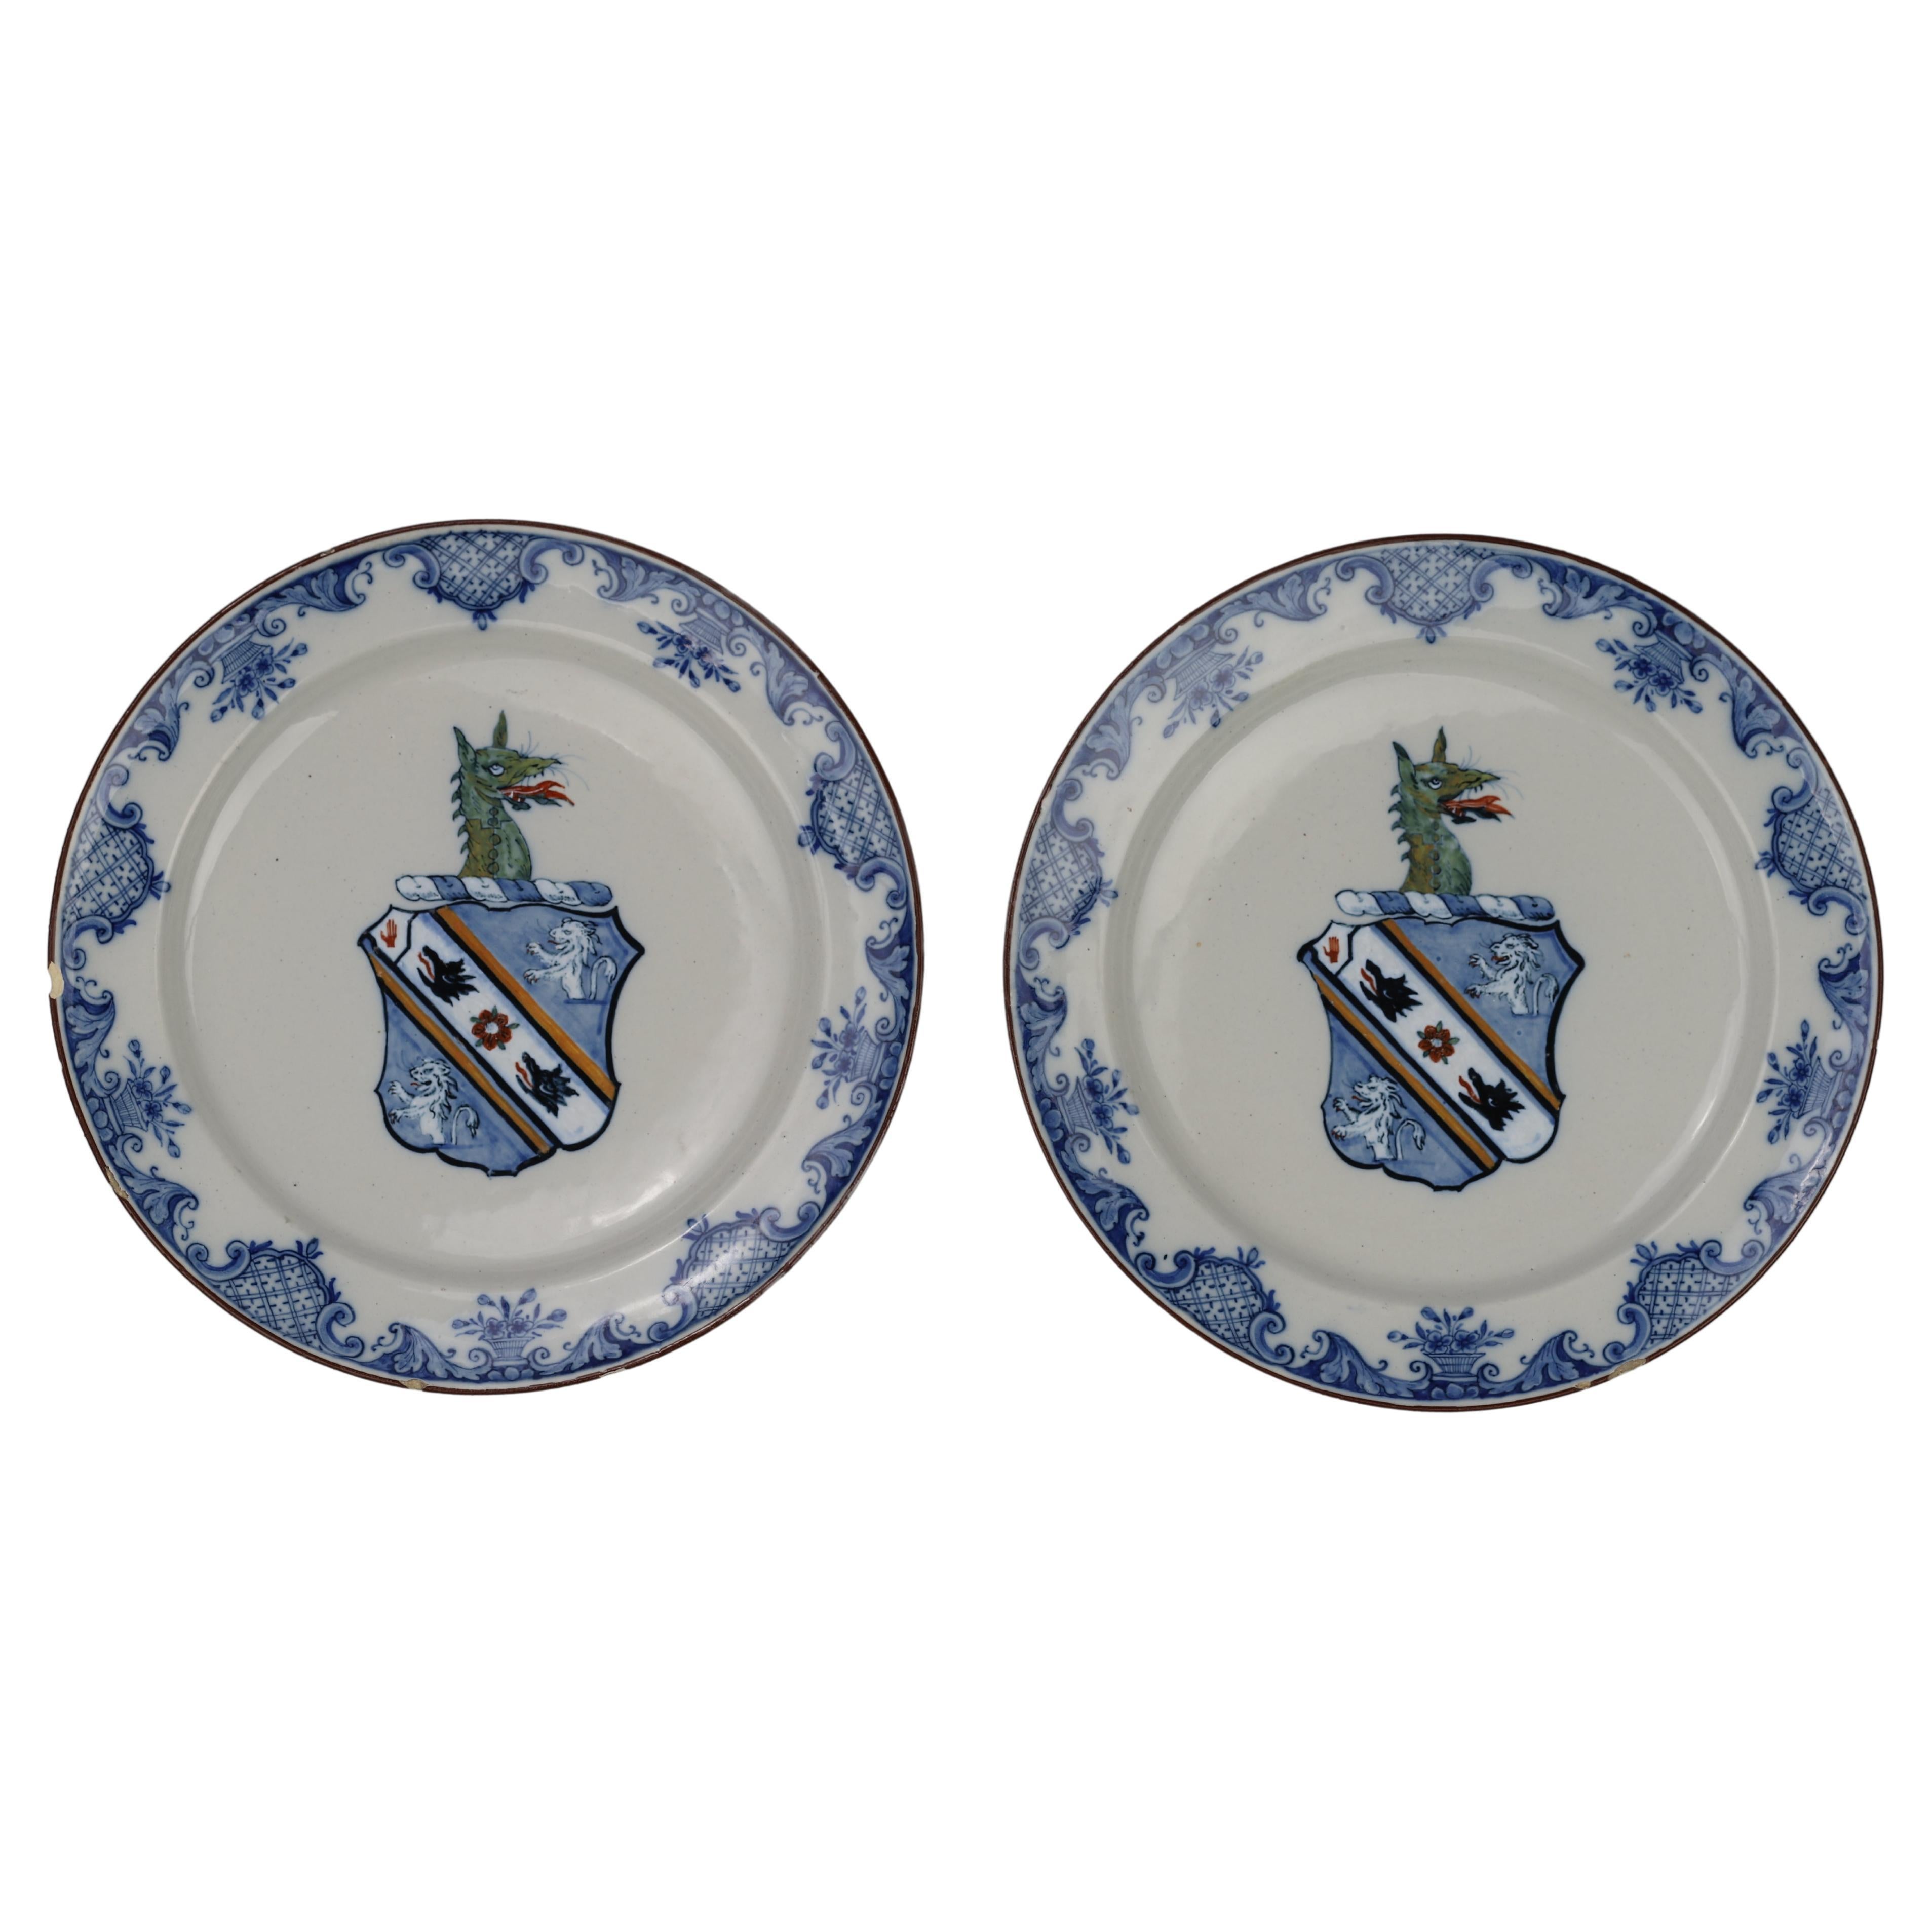 City: Delft
Workshop: De Grieksche A
Owner: Jan Theunisz Dextra
Date: 1758 - 1764

A set of twee beautiful and fine armorial plates with the coat of arms and dragon head crest of Sir Whistler Webster, 2nd Baronet of Battle Abby, Co. Sussex. The